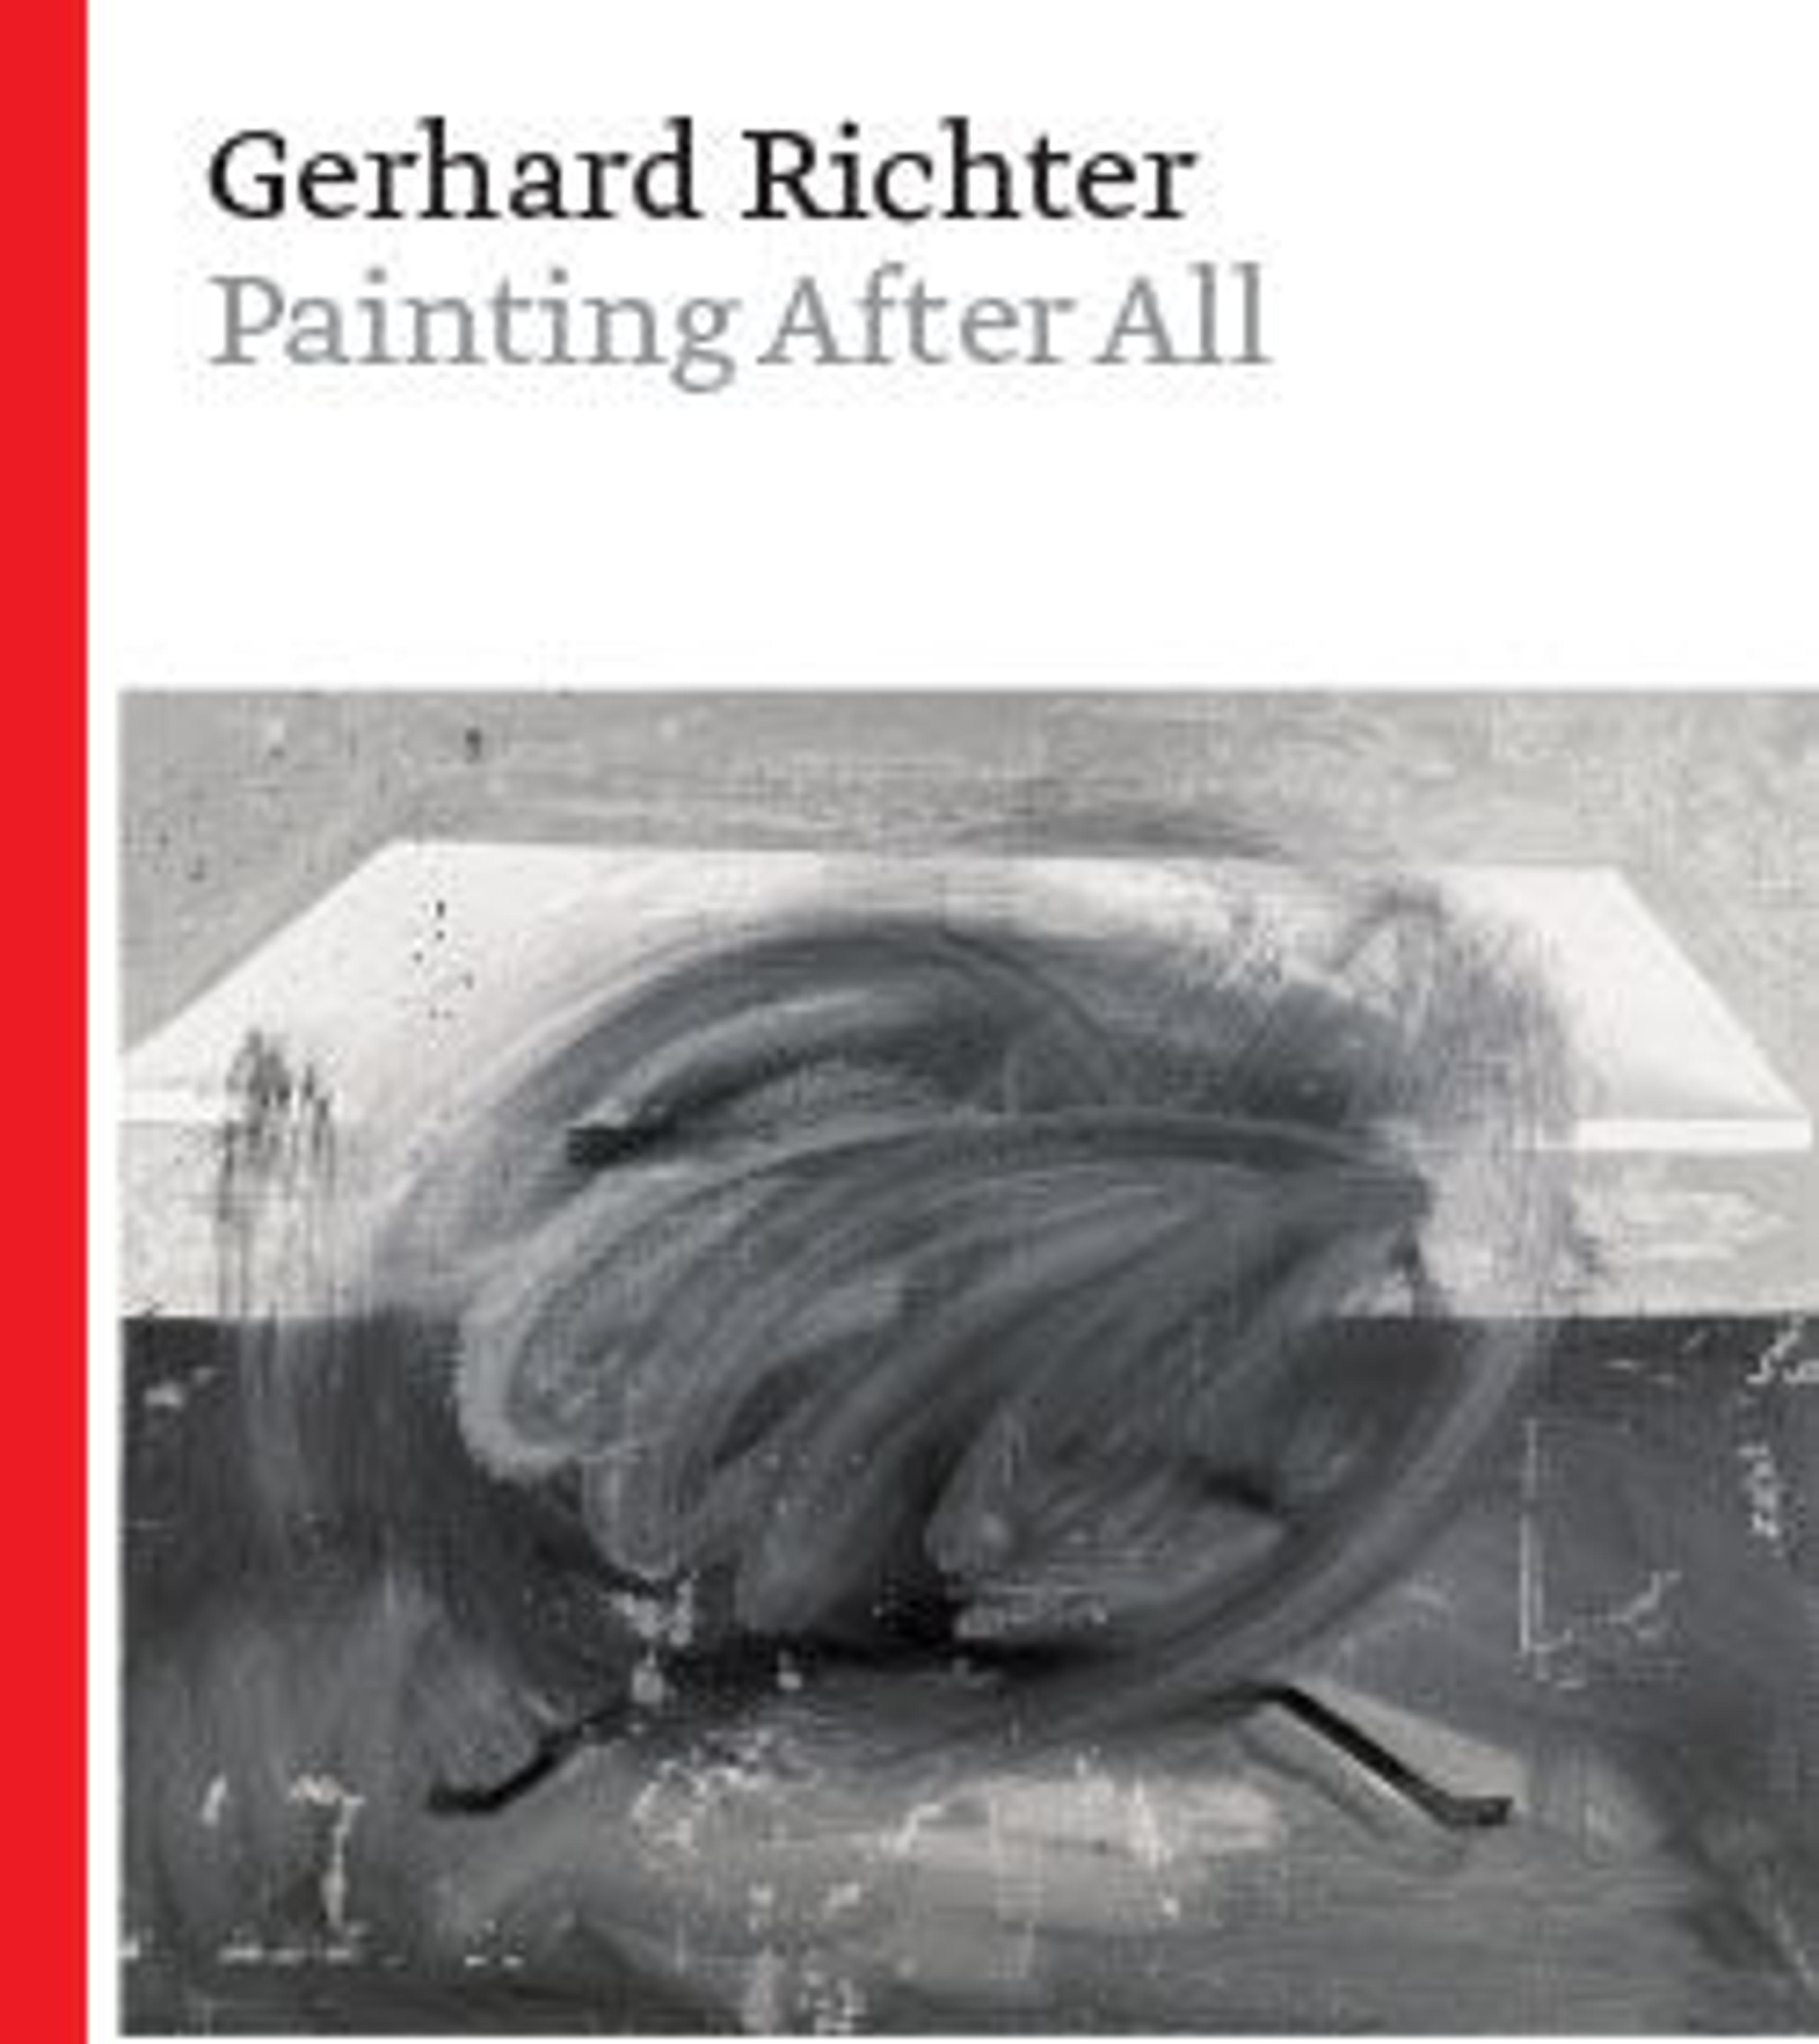 Gerhard Richter: Painting After All